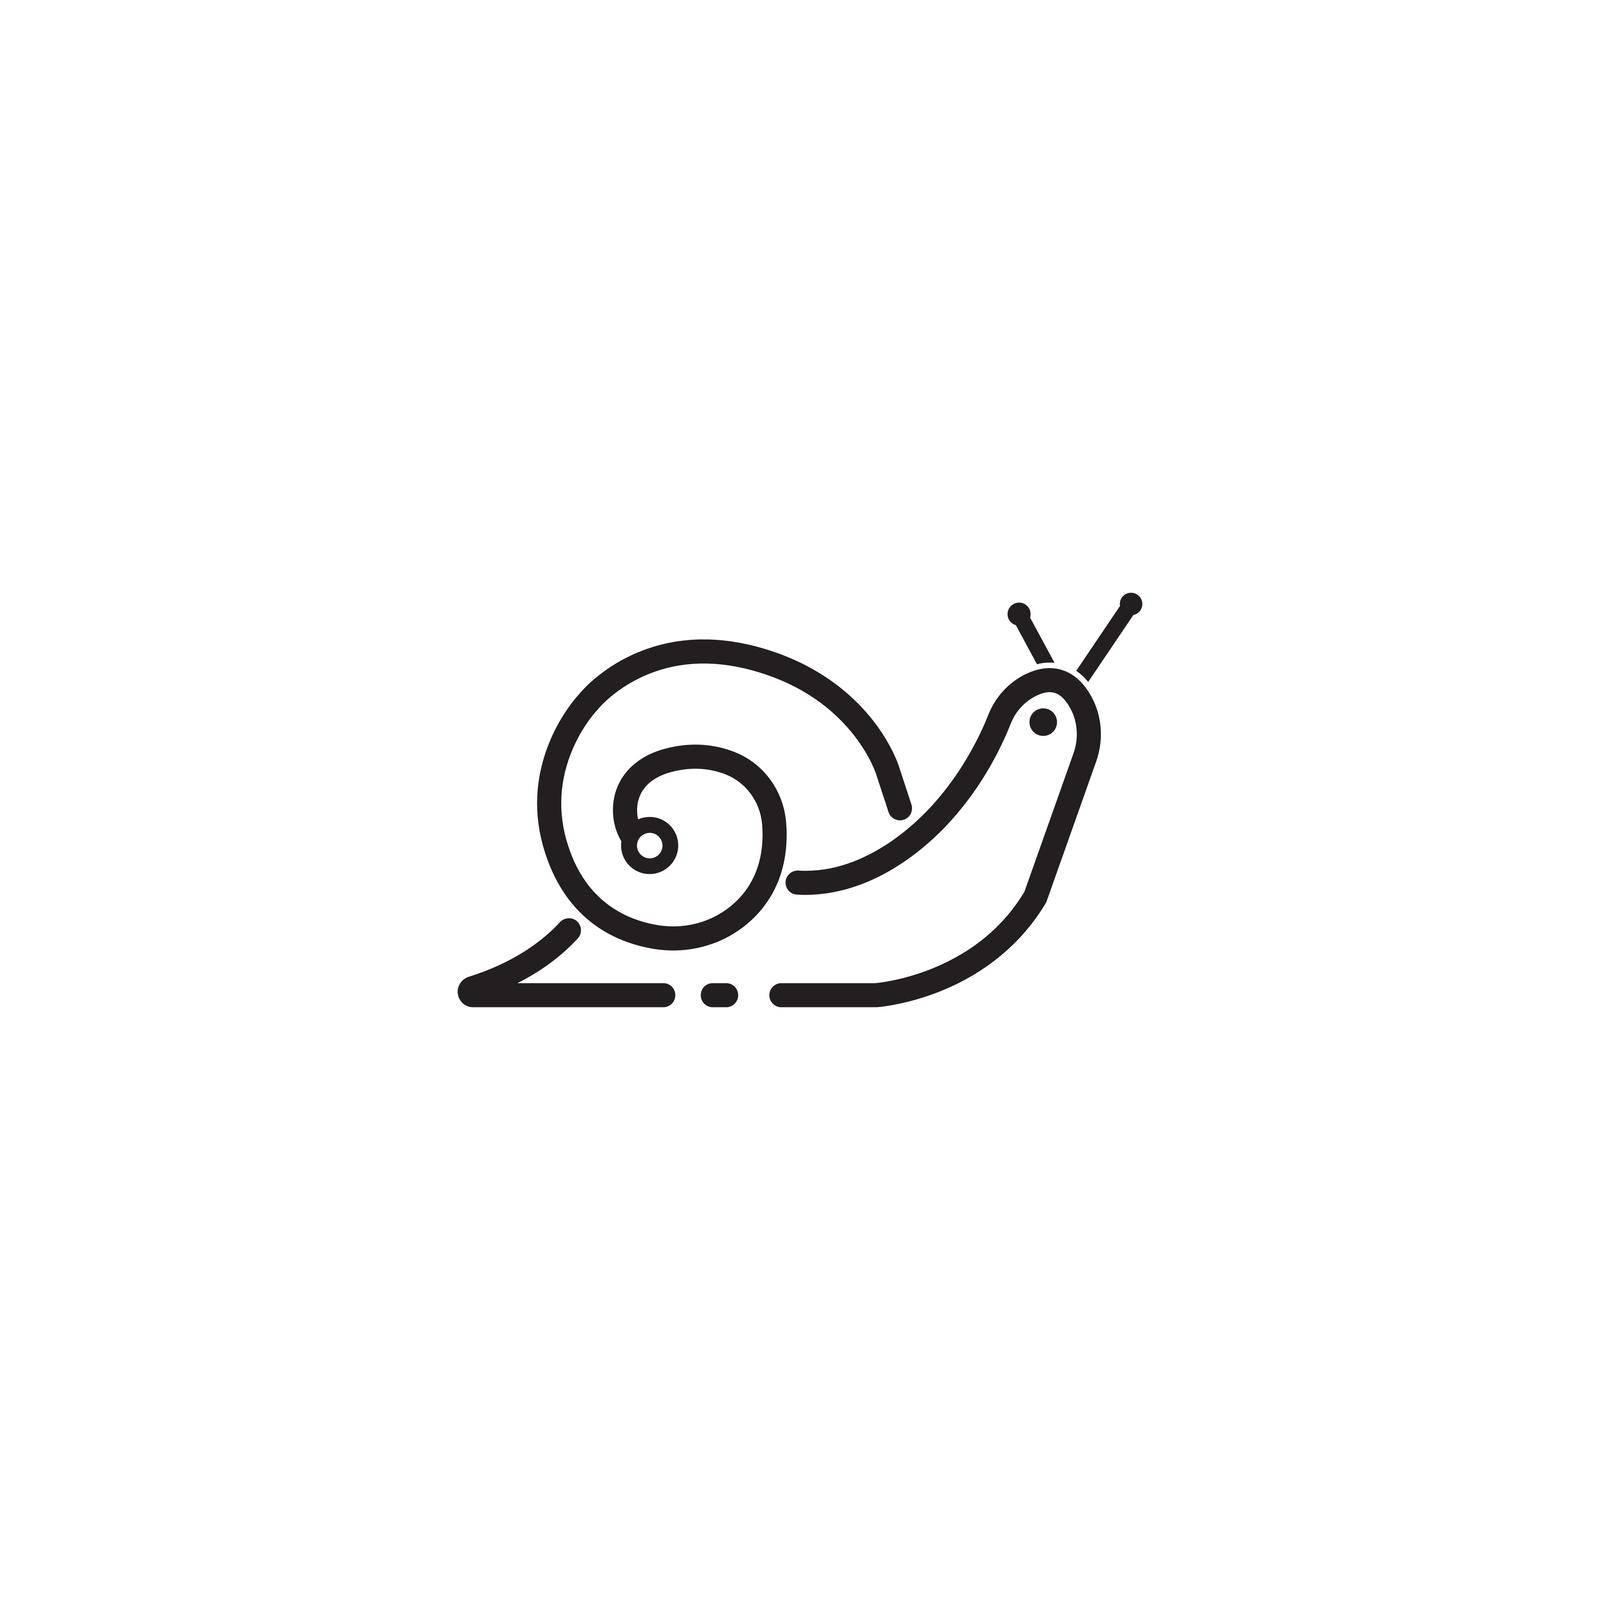 Snail icon by rnking